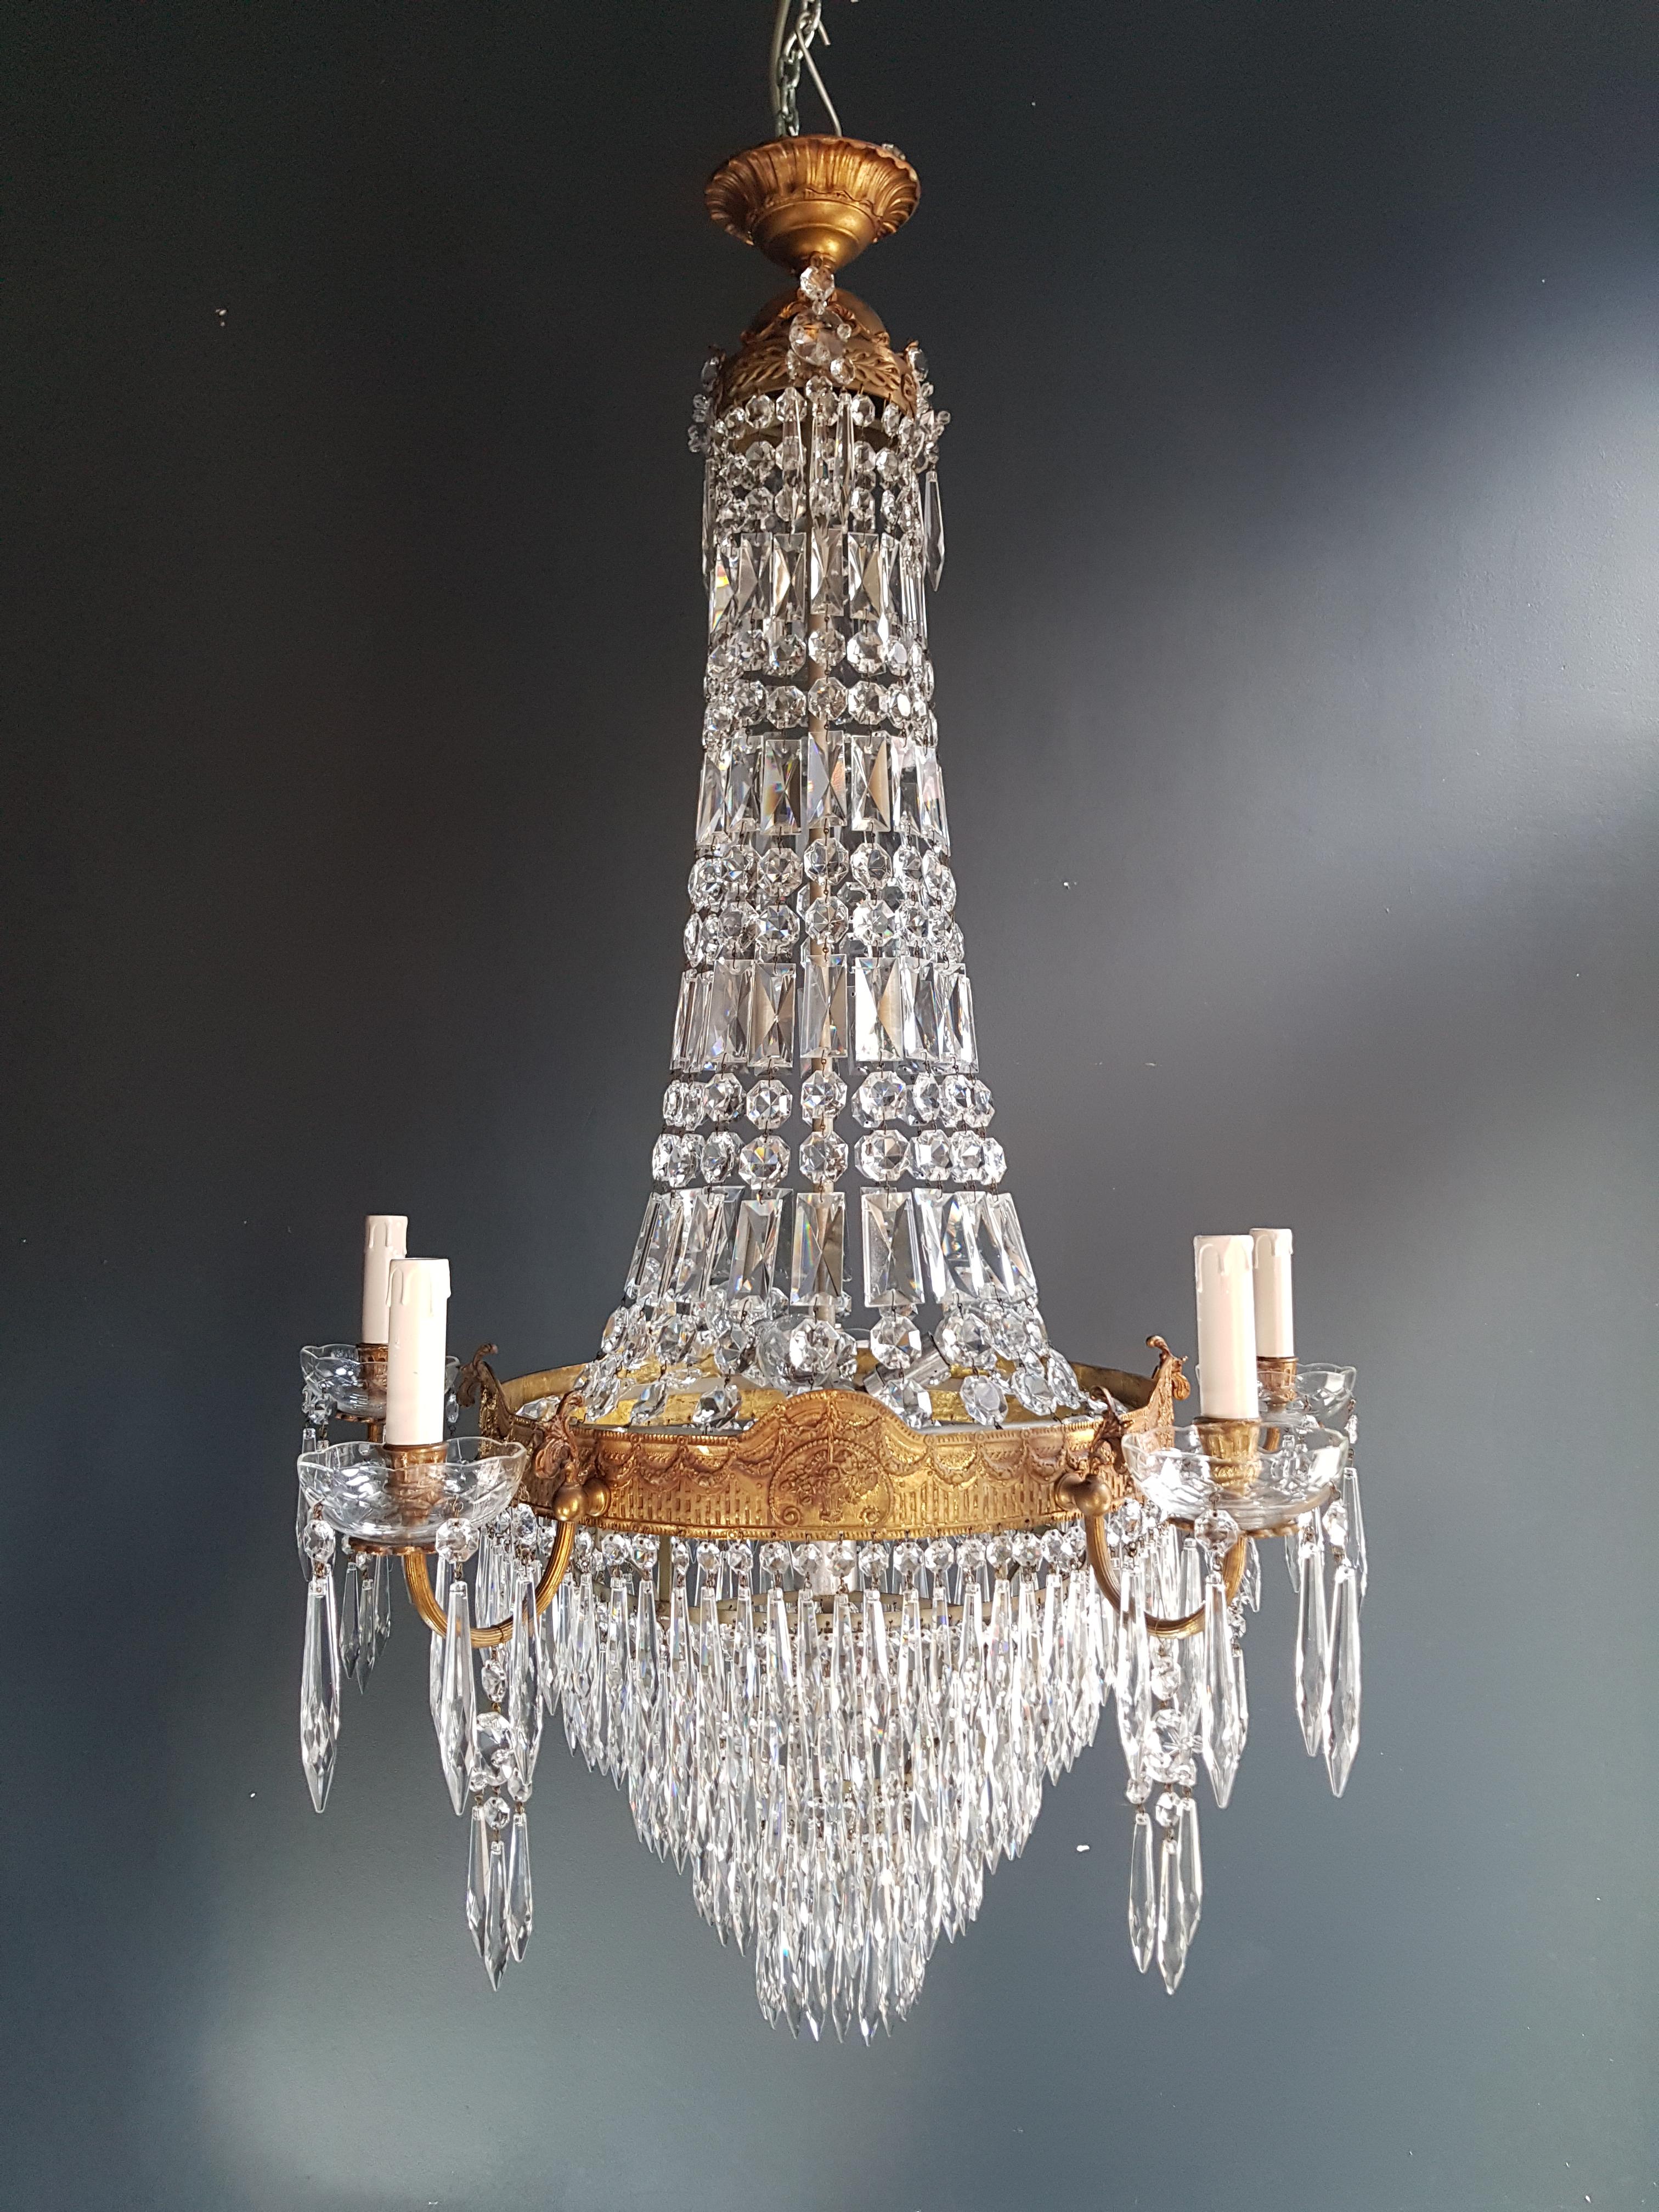 Early 20th Century Montgolfiè Empire Sac a Pearl Chandelier Crystal Lustre Ceiling Lamp Antique WoW